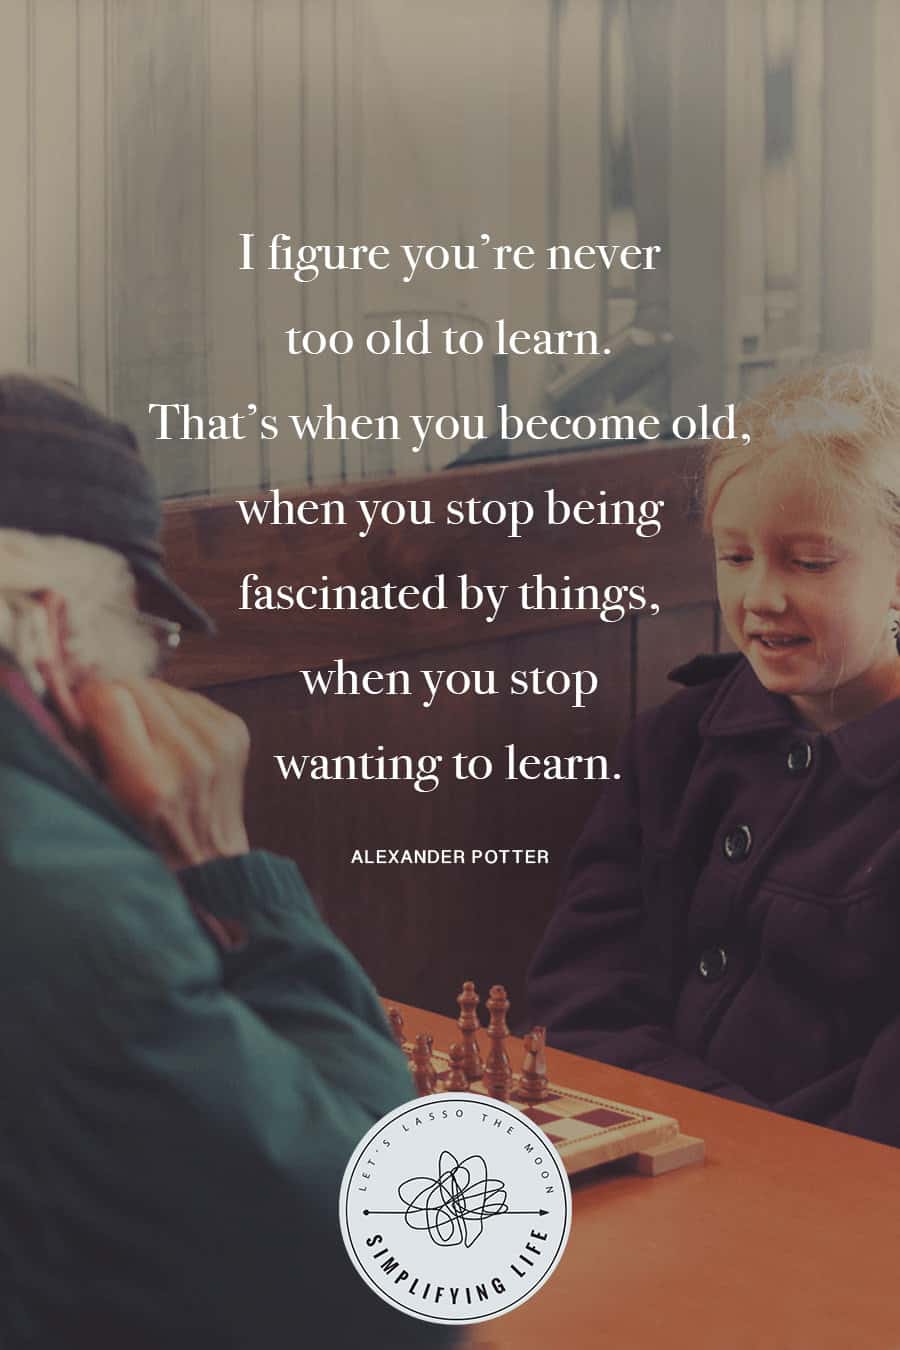 A grandpa playing chess with a young girl at a coffee shop with the following quote written over top, "You're never too old to learn. That's when you become old, when you stop being fascinated by things, when you stop wanting to learn."